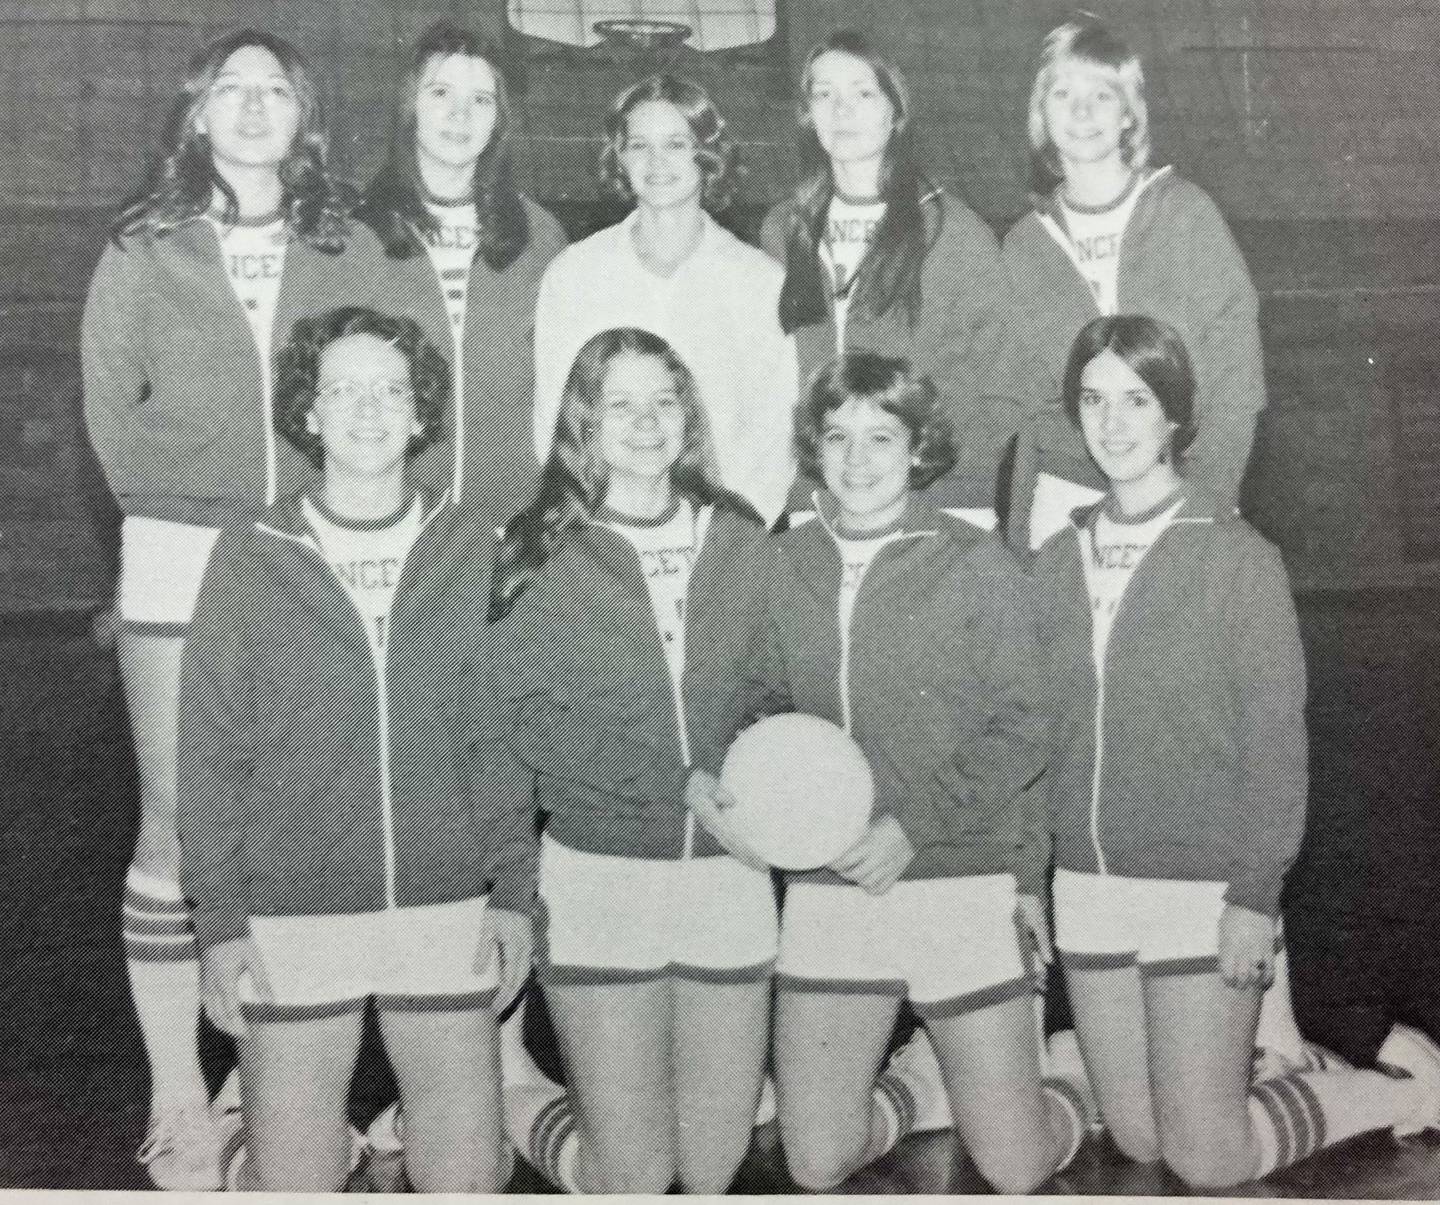 Rita Placek came to Princeton High School in the fall of 1974, taking over as volleyball coach in its second season. Team members were Jorja Bogott, Melinda Edgerly, Rita Goble, Deanna Howarter, Dina Lackey, Janet McMahon, Gail Schleuger and Dawn Wagner.